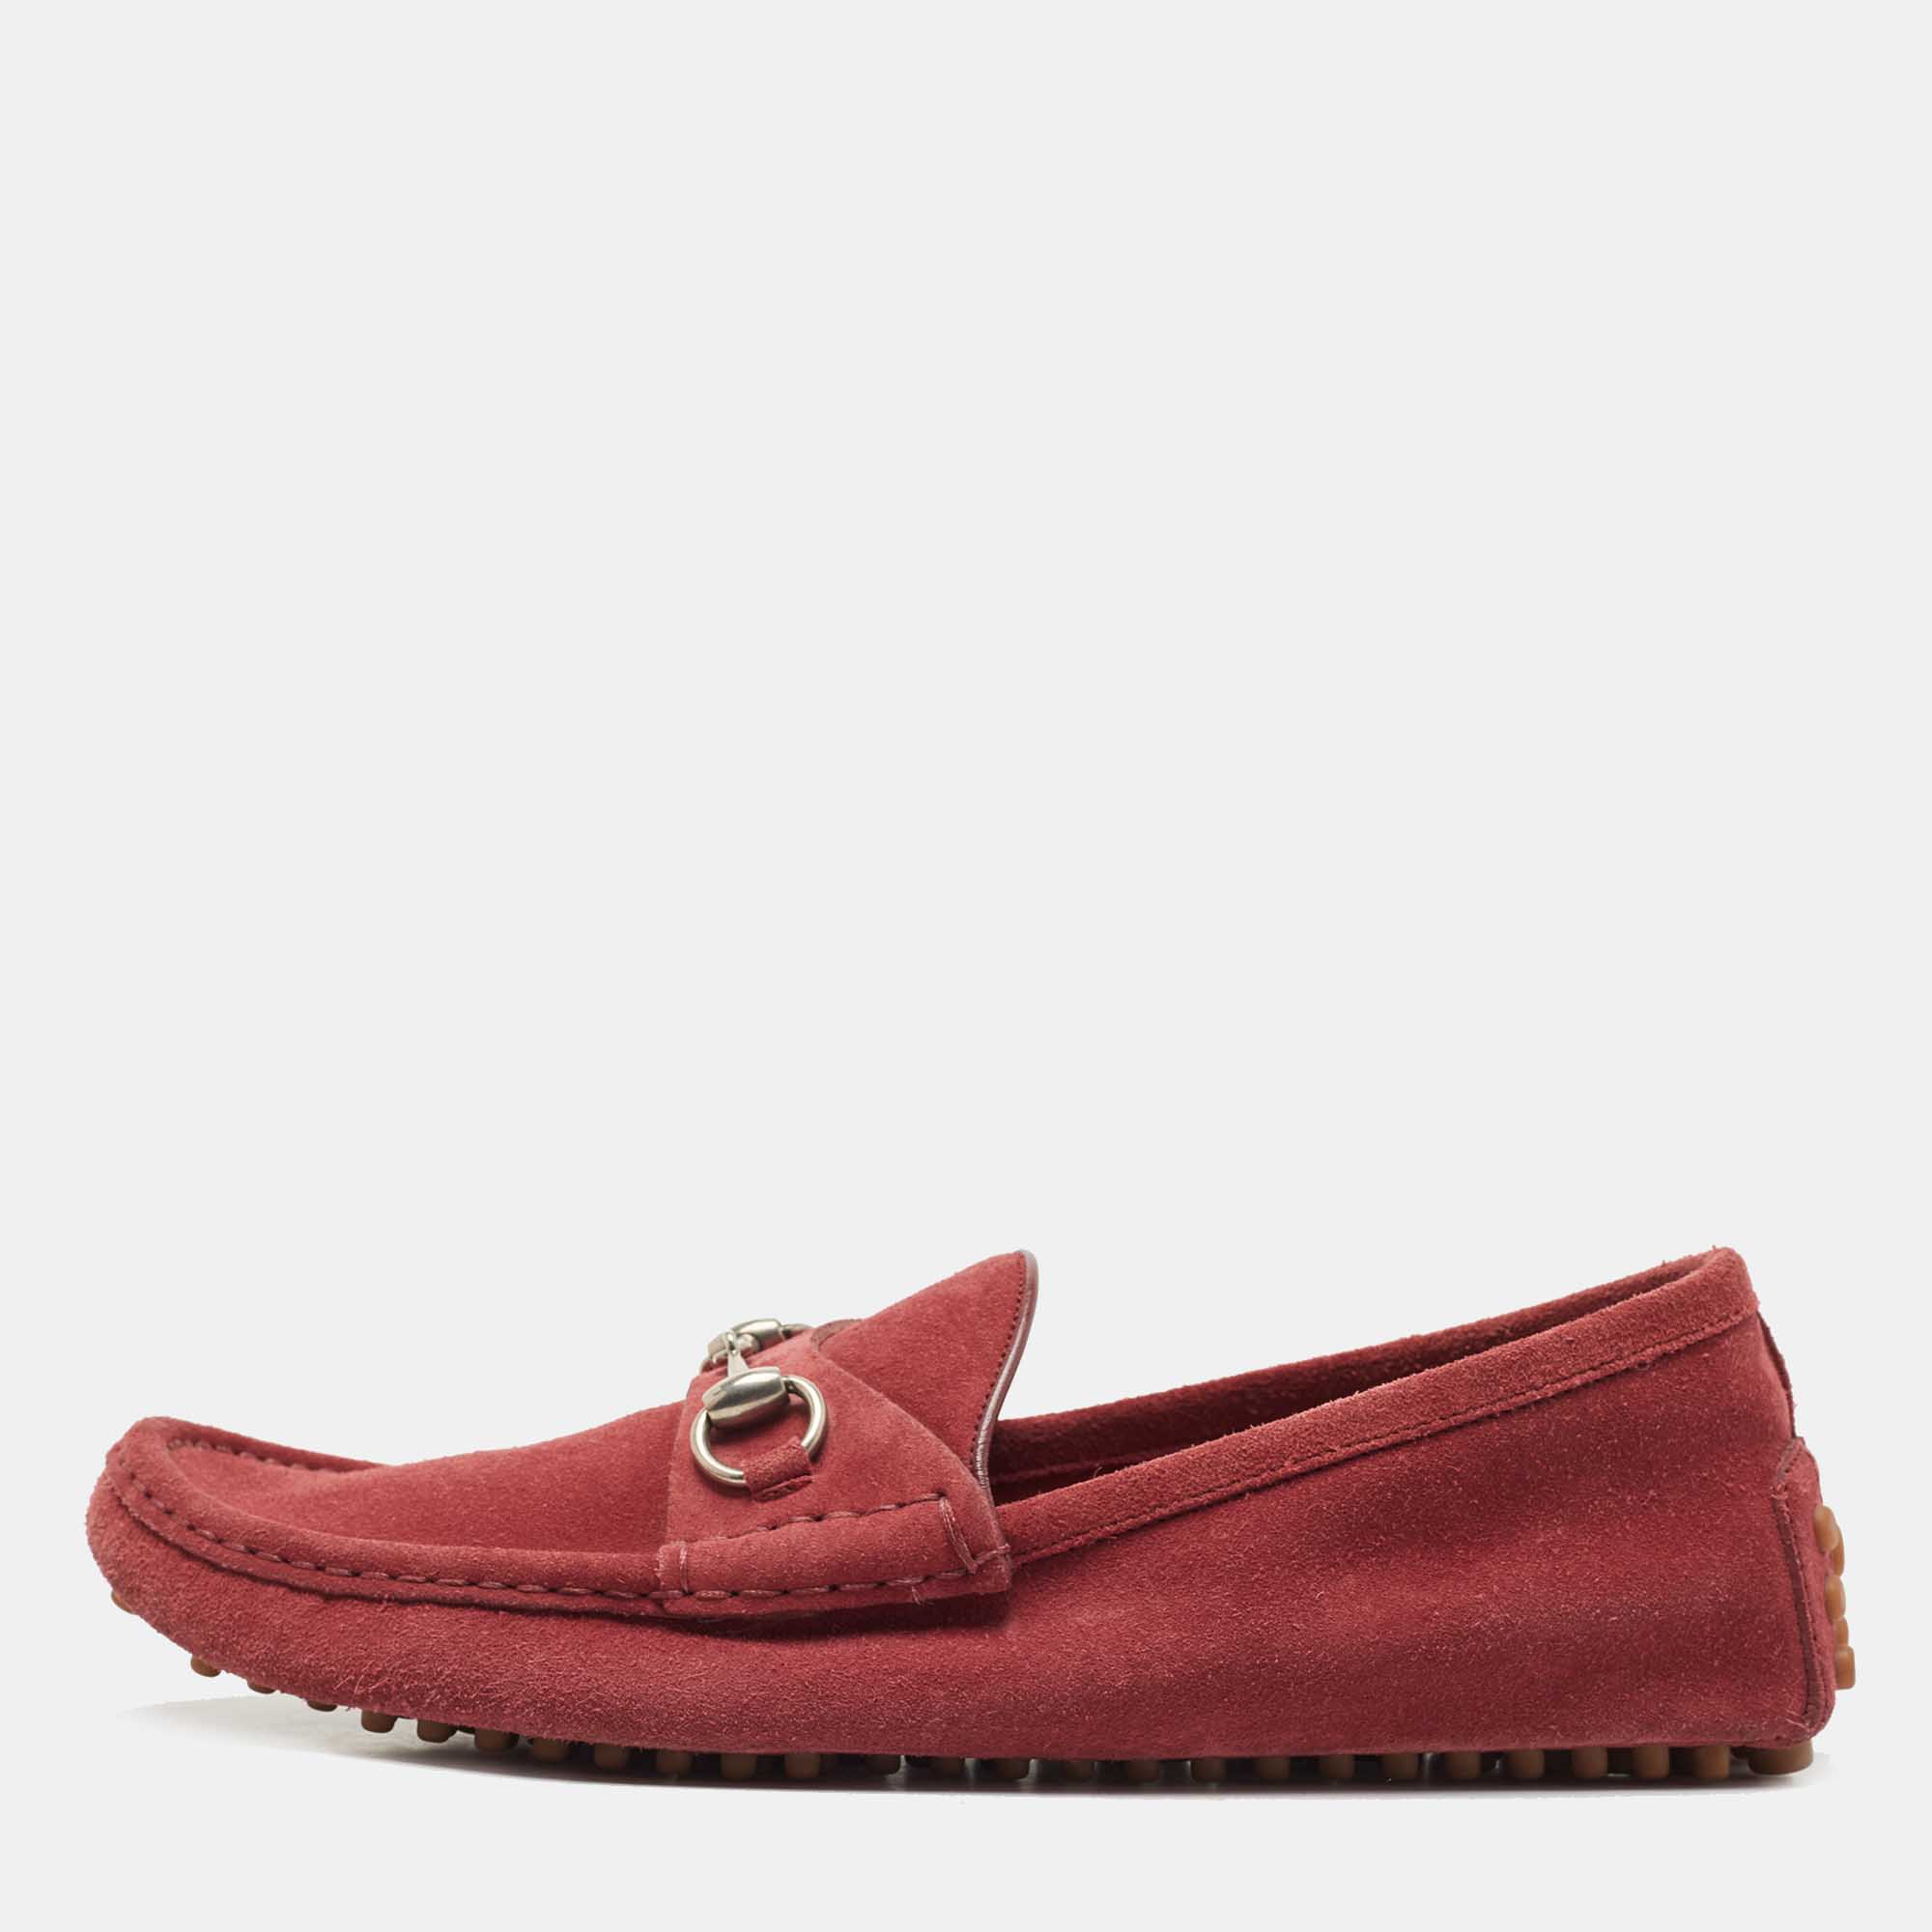 Pre-owned Gucci Red Suede Horsebit Slip On Loafers Size 42